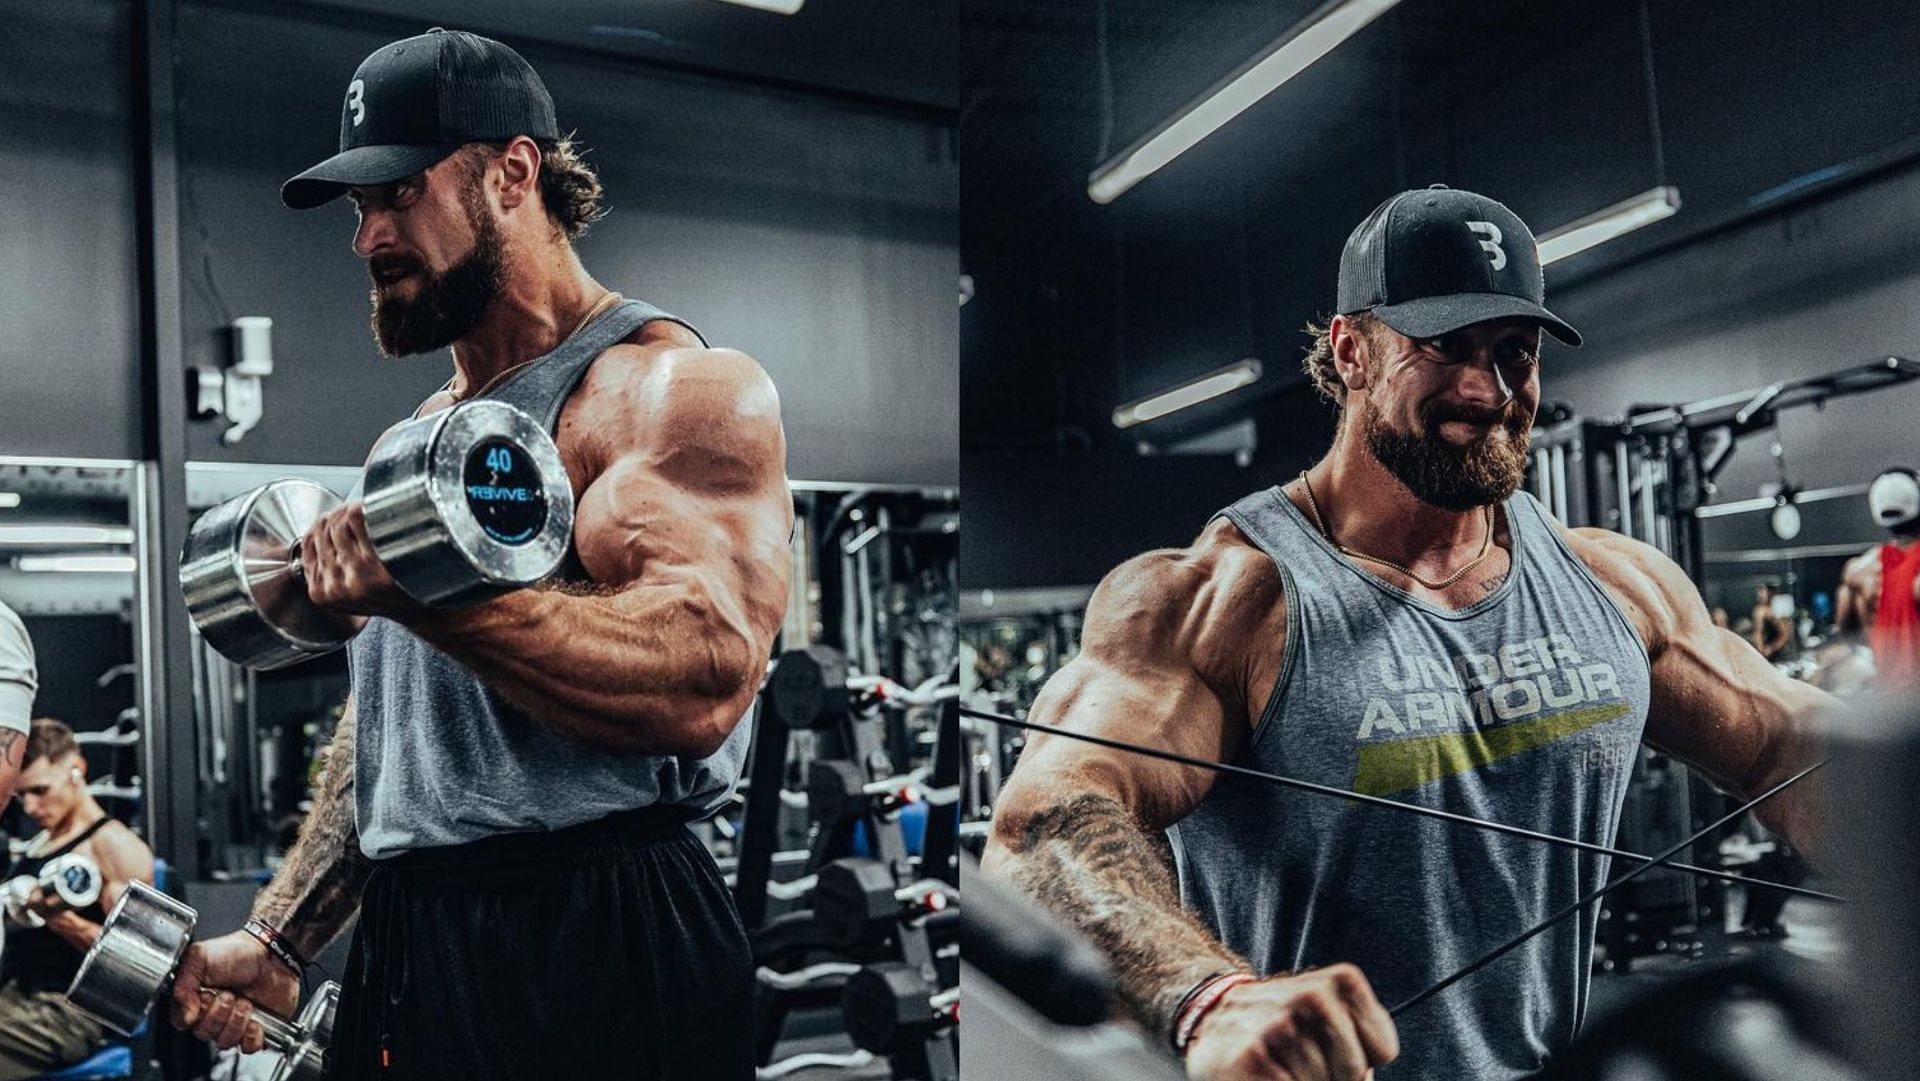 How Chris Bumstead Trains His Arms With FST-7?